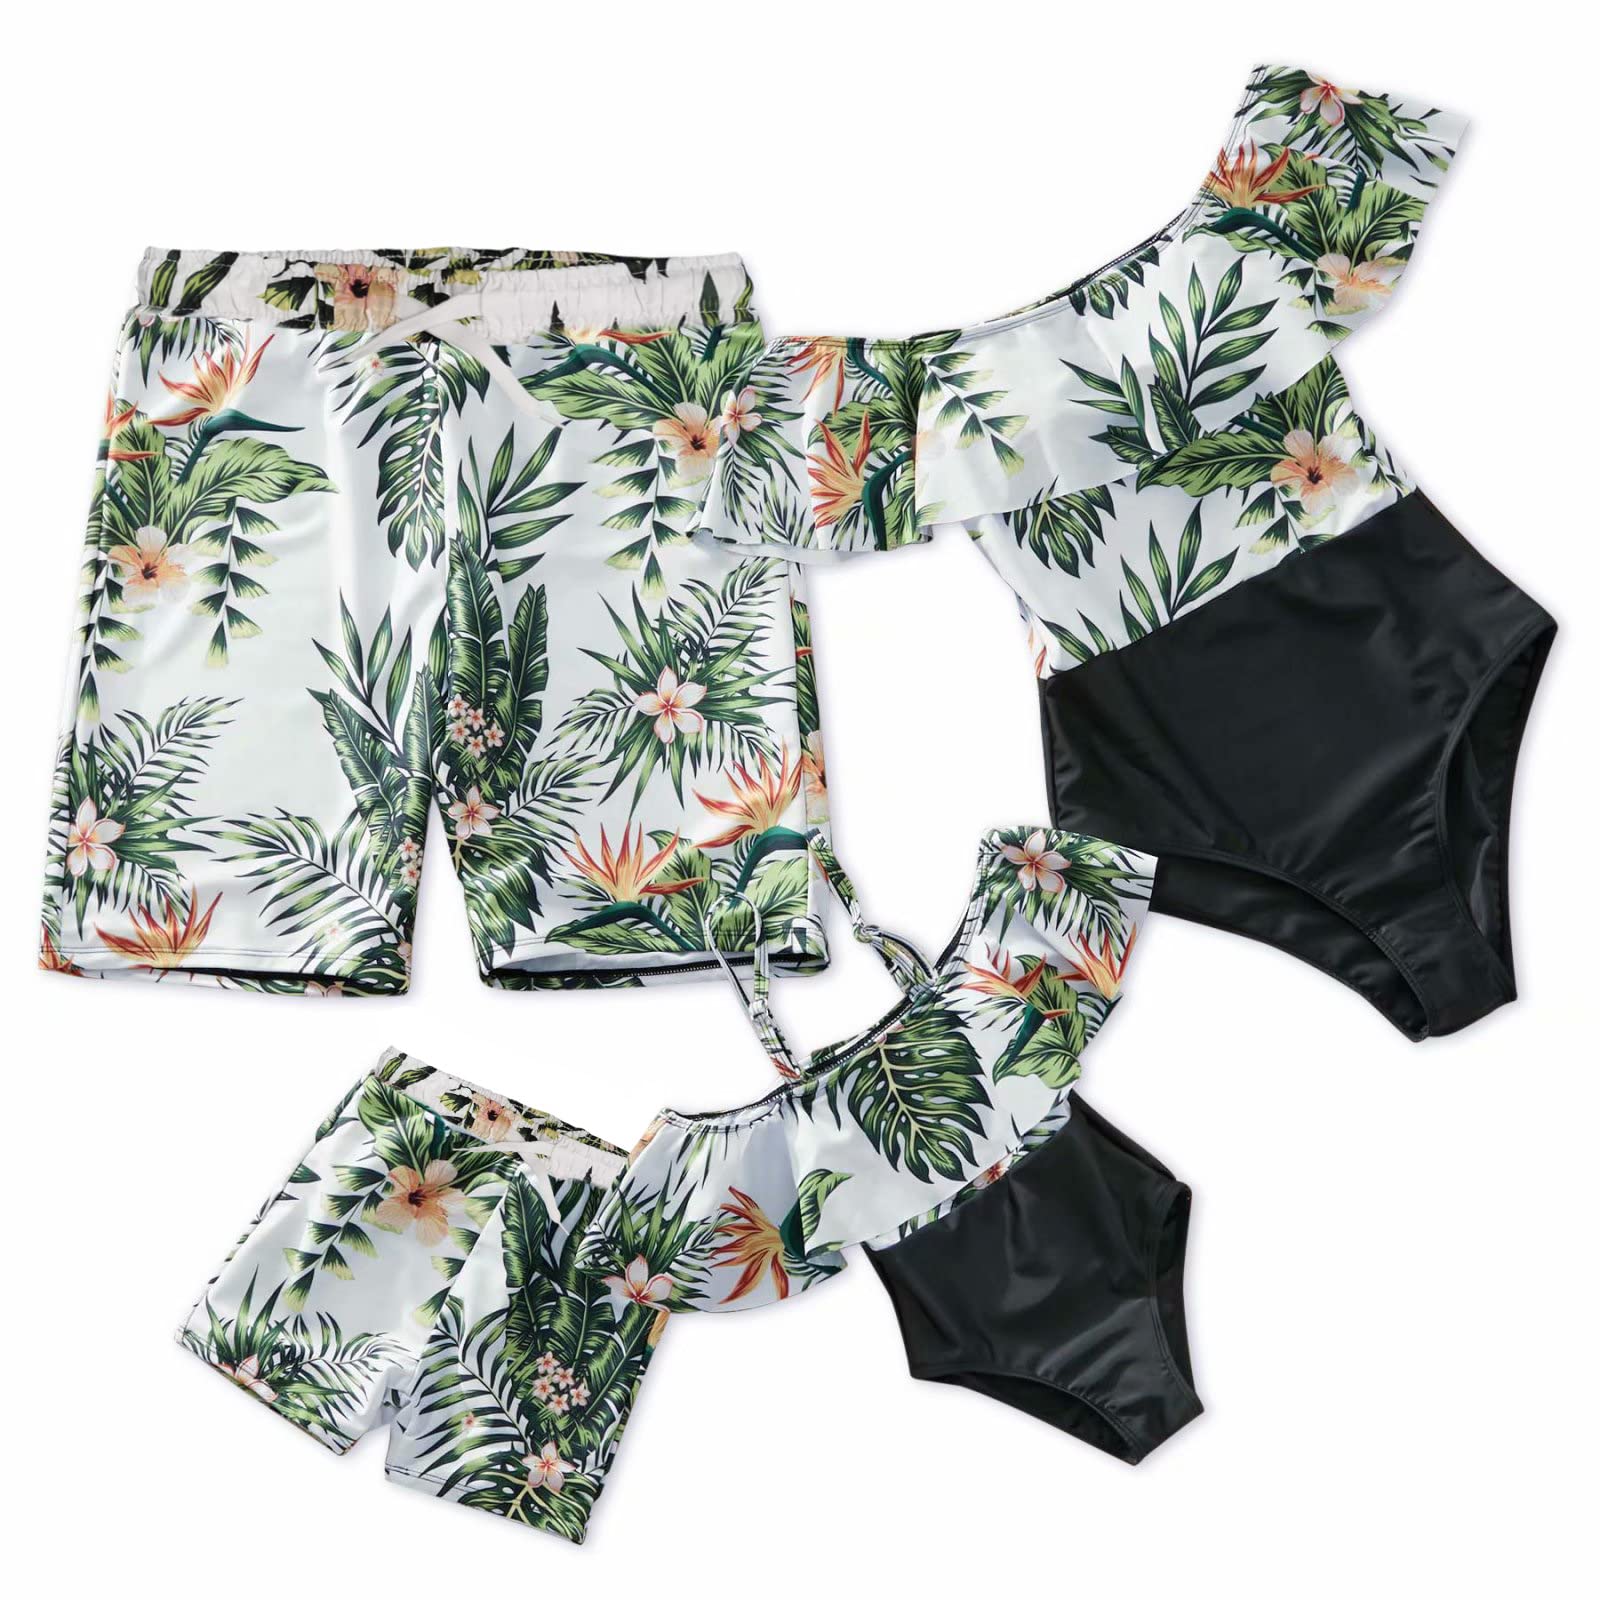 Leafy Ruffles Mommy and Me Matching Swimsuits - Girl 2T